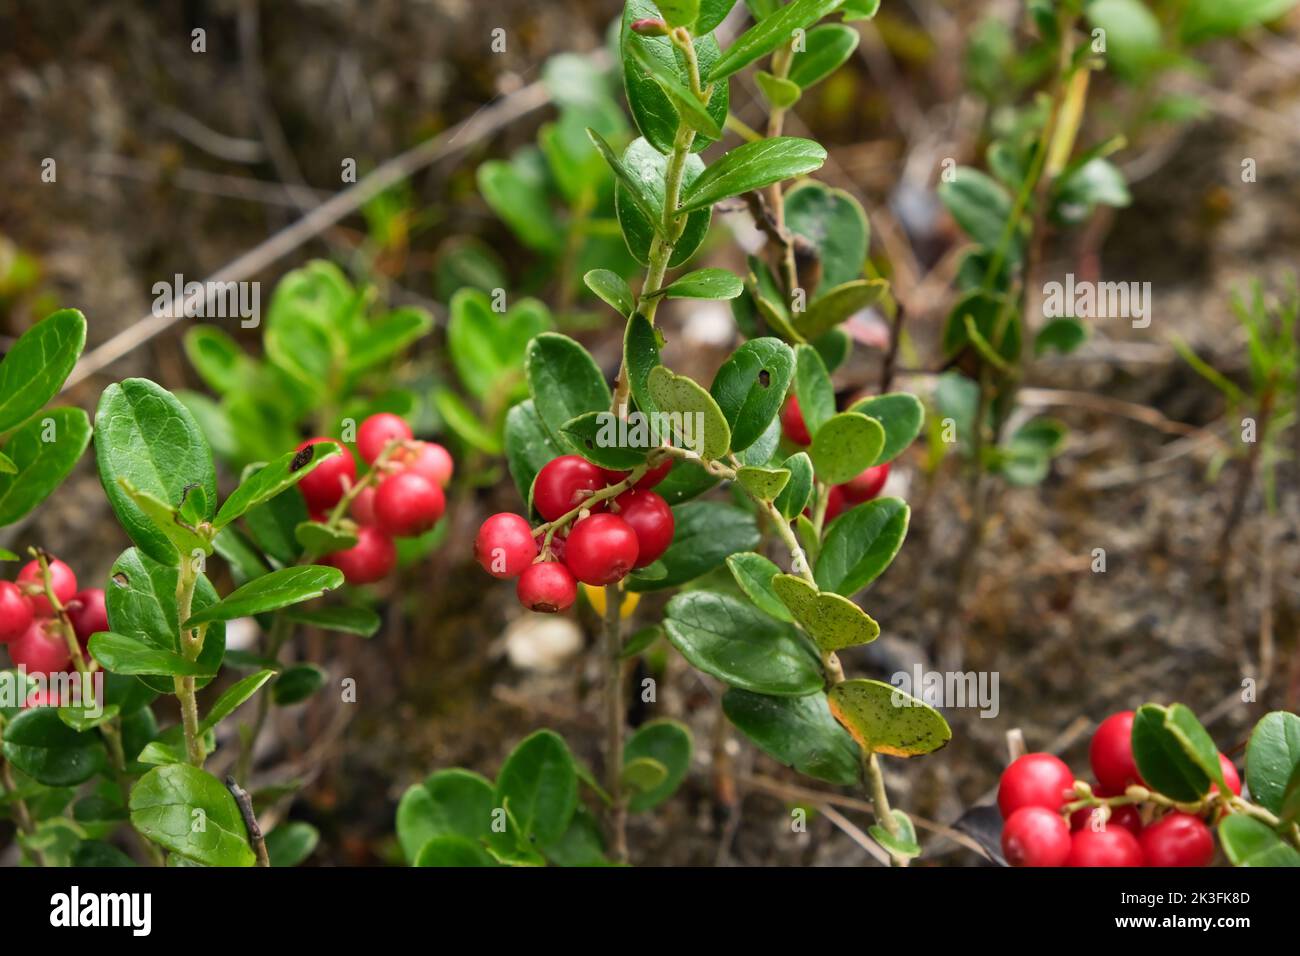 Red ripe lingonberry close-up. Red cranberry berry in the forest. Red cranberries growing in the wild forest. Stock Photo